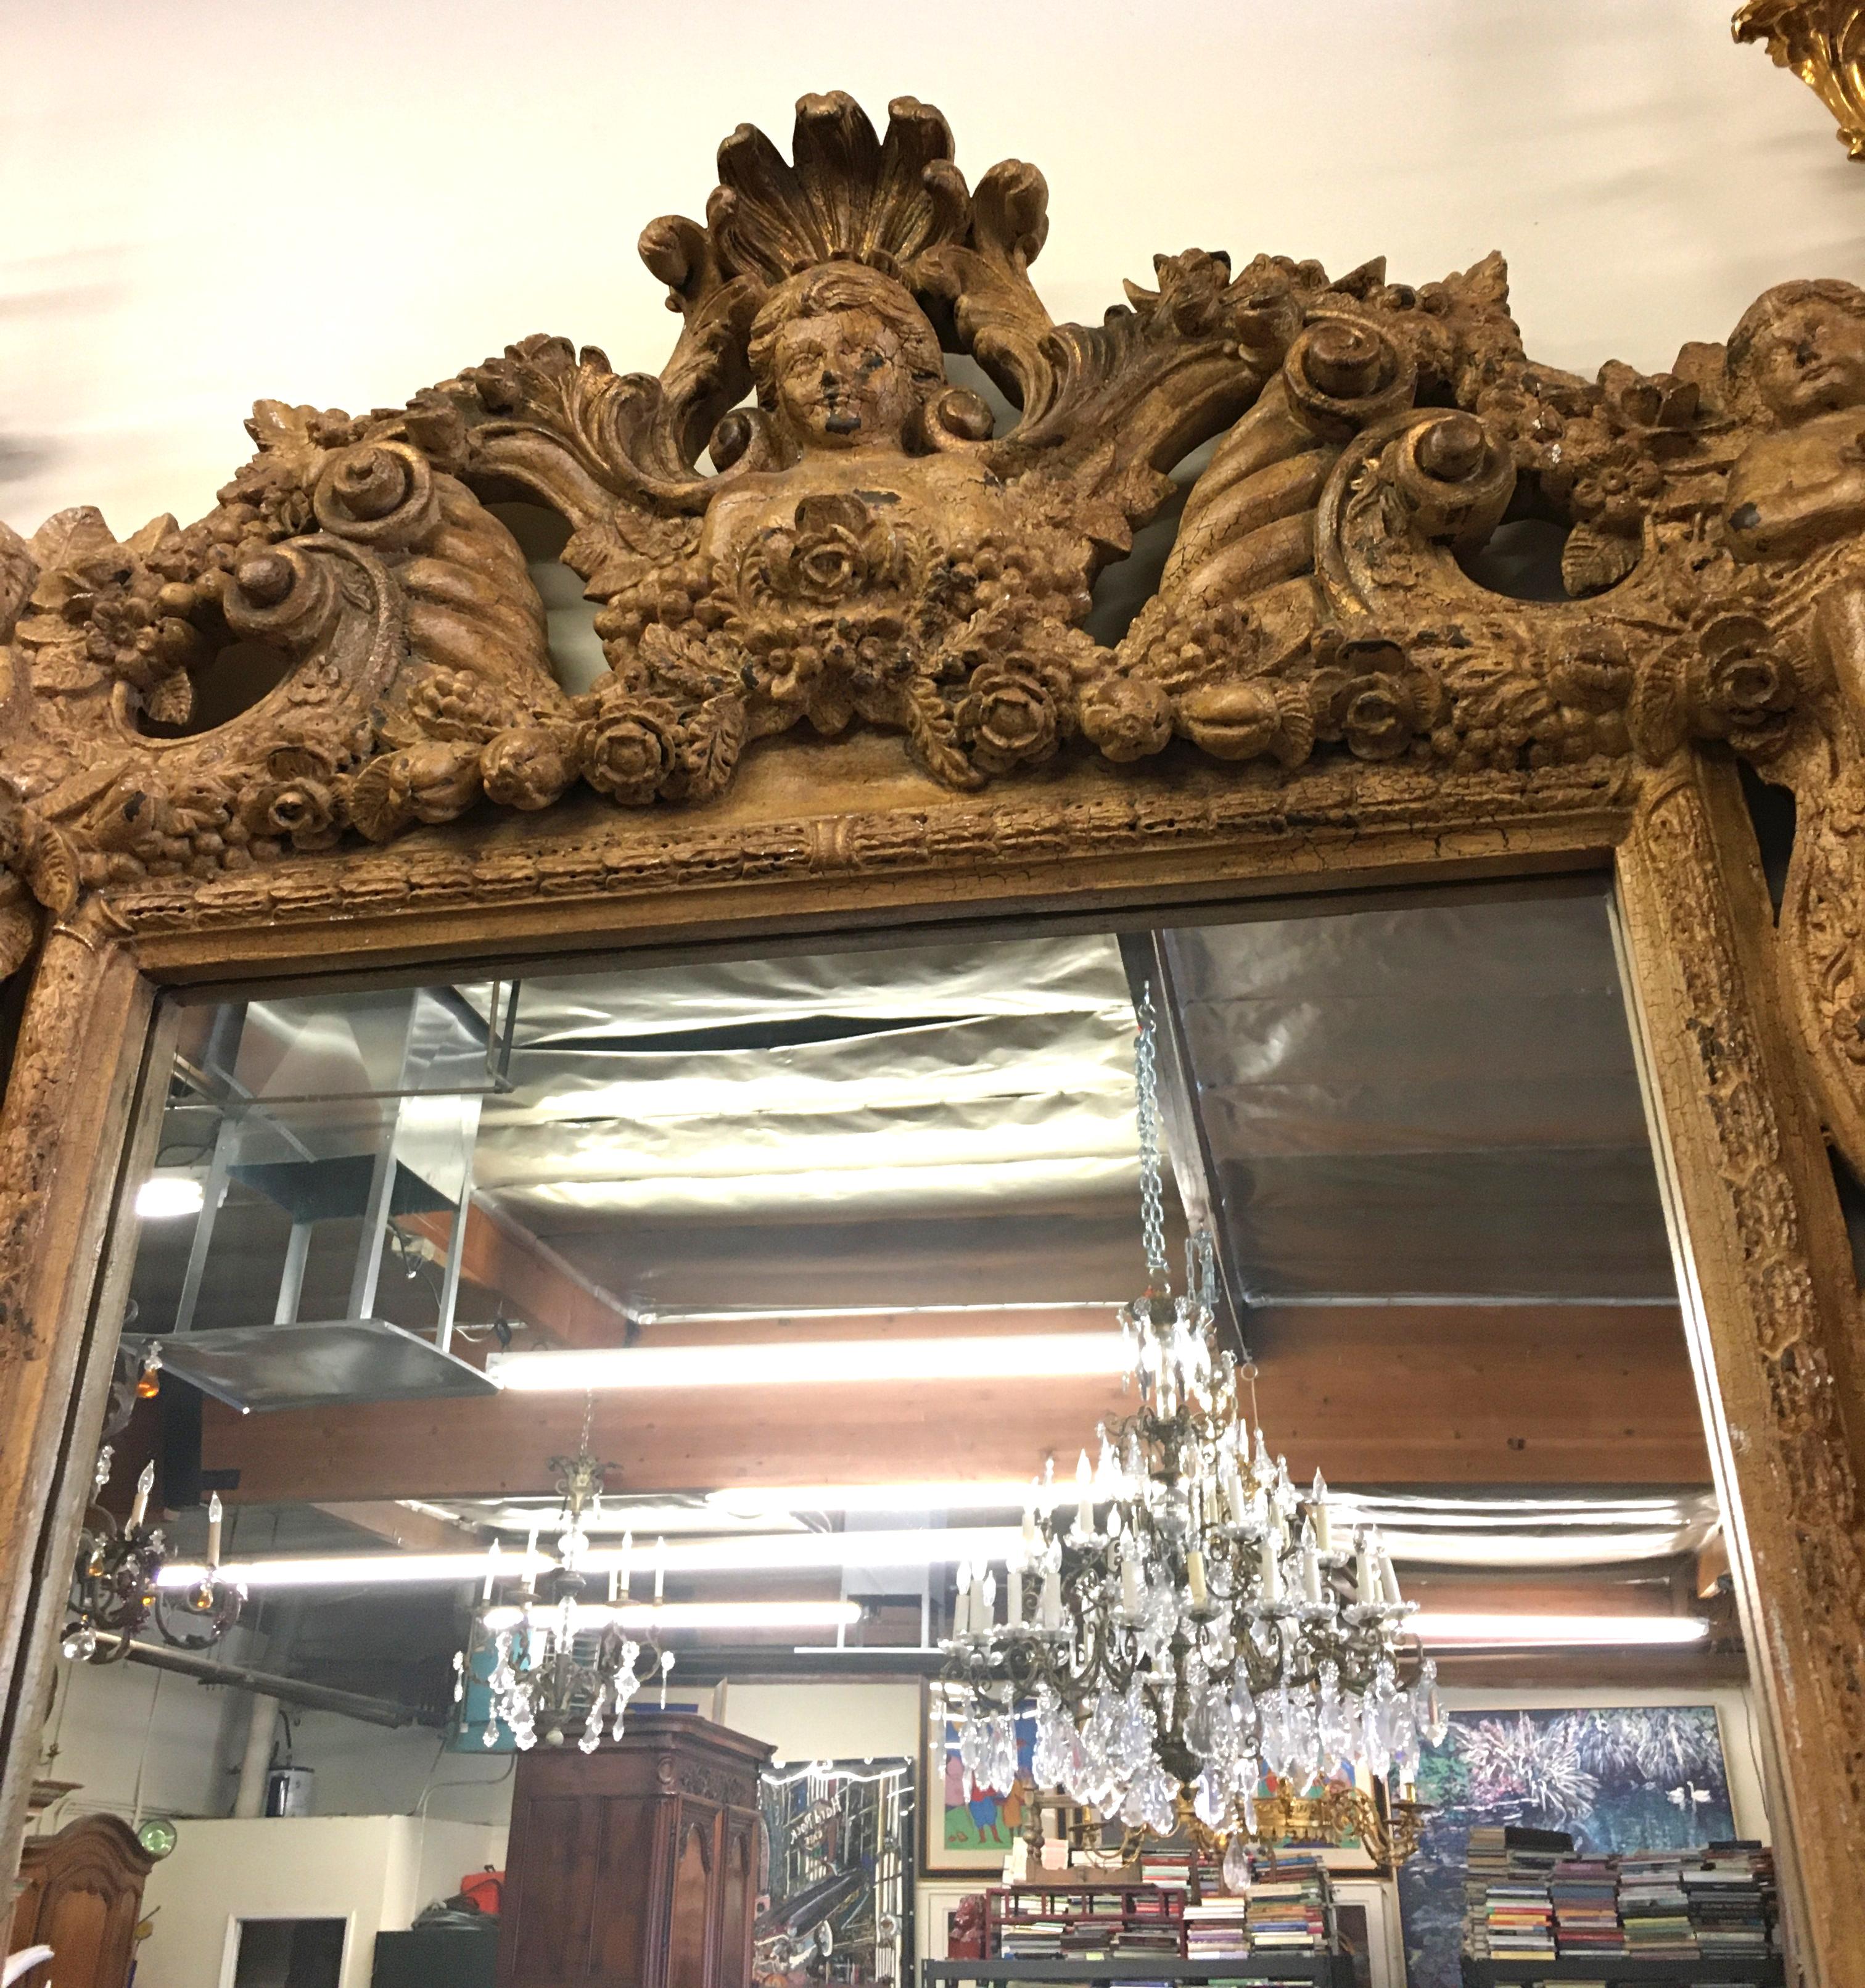 This magnificent Italian 19th century three dimensionally carved mirror has sitting puttis at the right and left sides at the top with a coquille in the center with a putti holding flowers. The perimeter of the mirror has carved fruit and acanthus